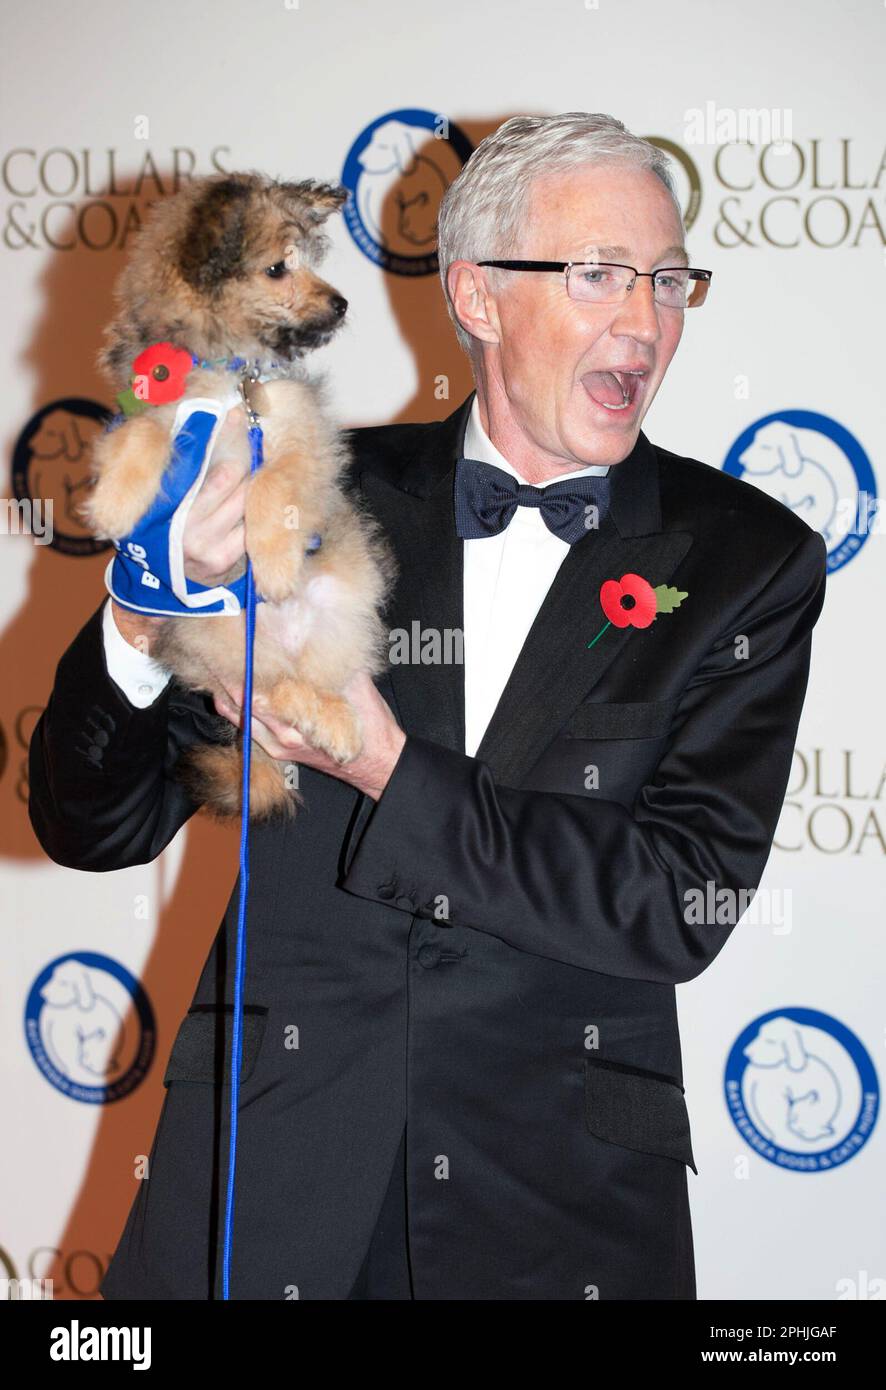 File photo dated 30/10/14 Paul O'Grady arriving at the Battersea Dogs' Collars and Coats Gala fundraising ball at the Battersea Evolution Marquee, London. TV presenter and comedian Paul O'Grady has died at the age of 67, his partner Andre Portasio has said. The TV star, also known for his drag queen persona Lily Savage, died 'unexpectedly but peacefully' on Tuesday evening, a statement shared with the PA news agency via a representative said. Issue date: Wednesday March 29, 2023. Stock Photo